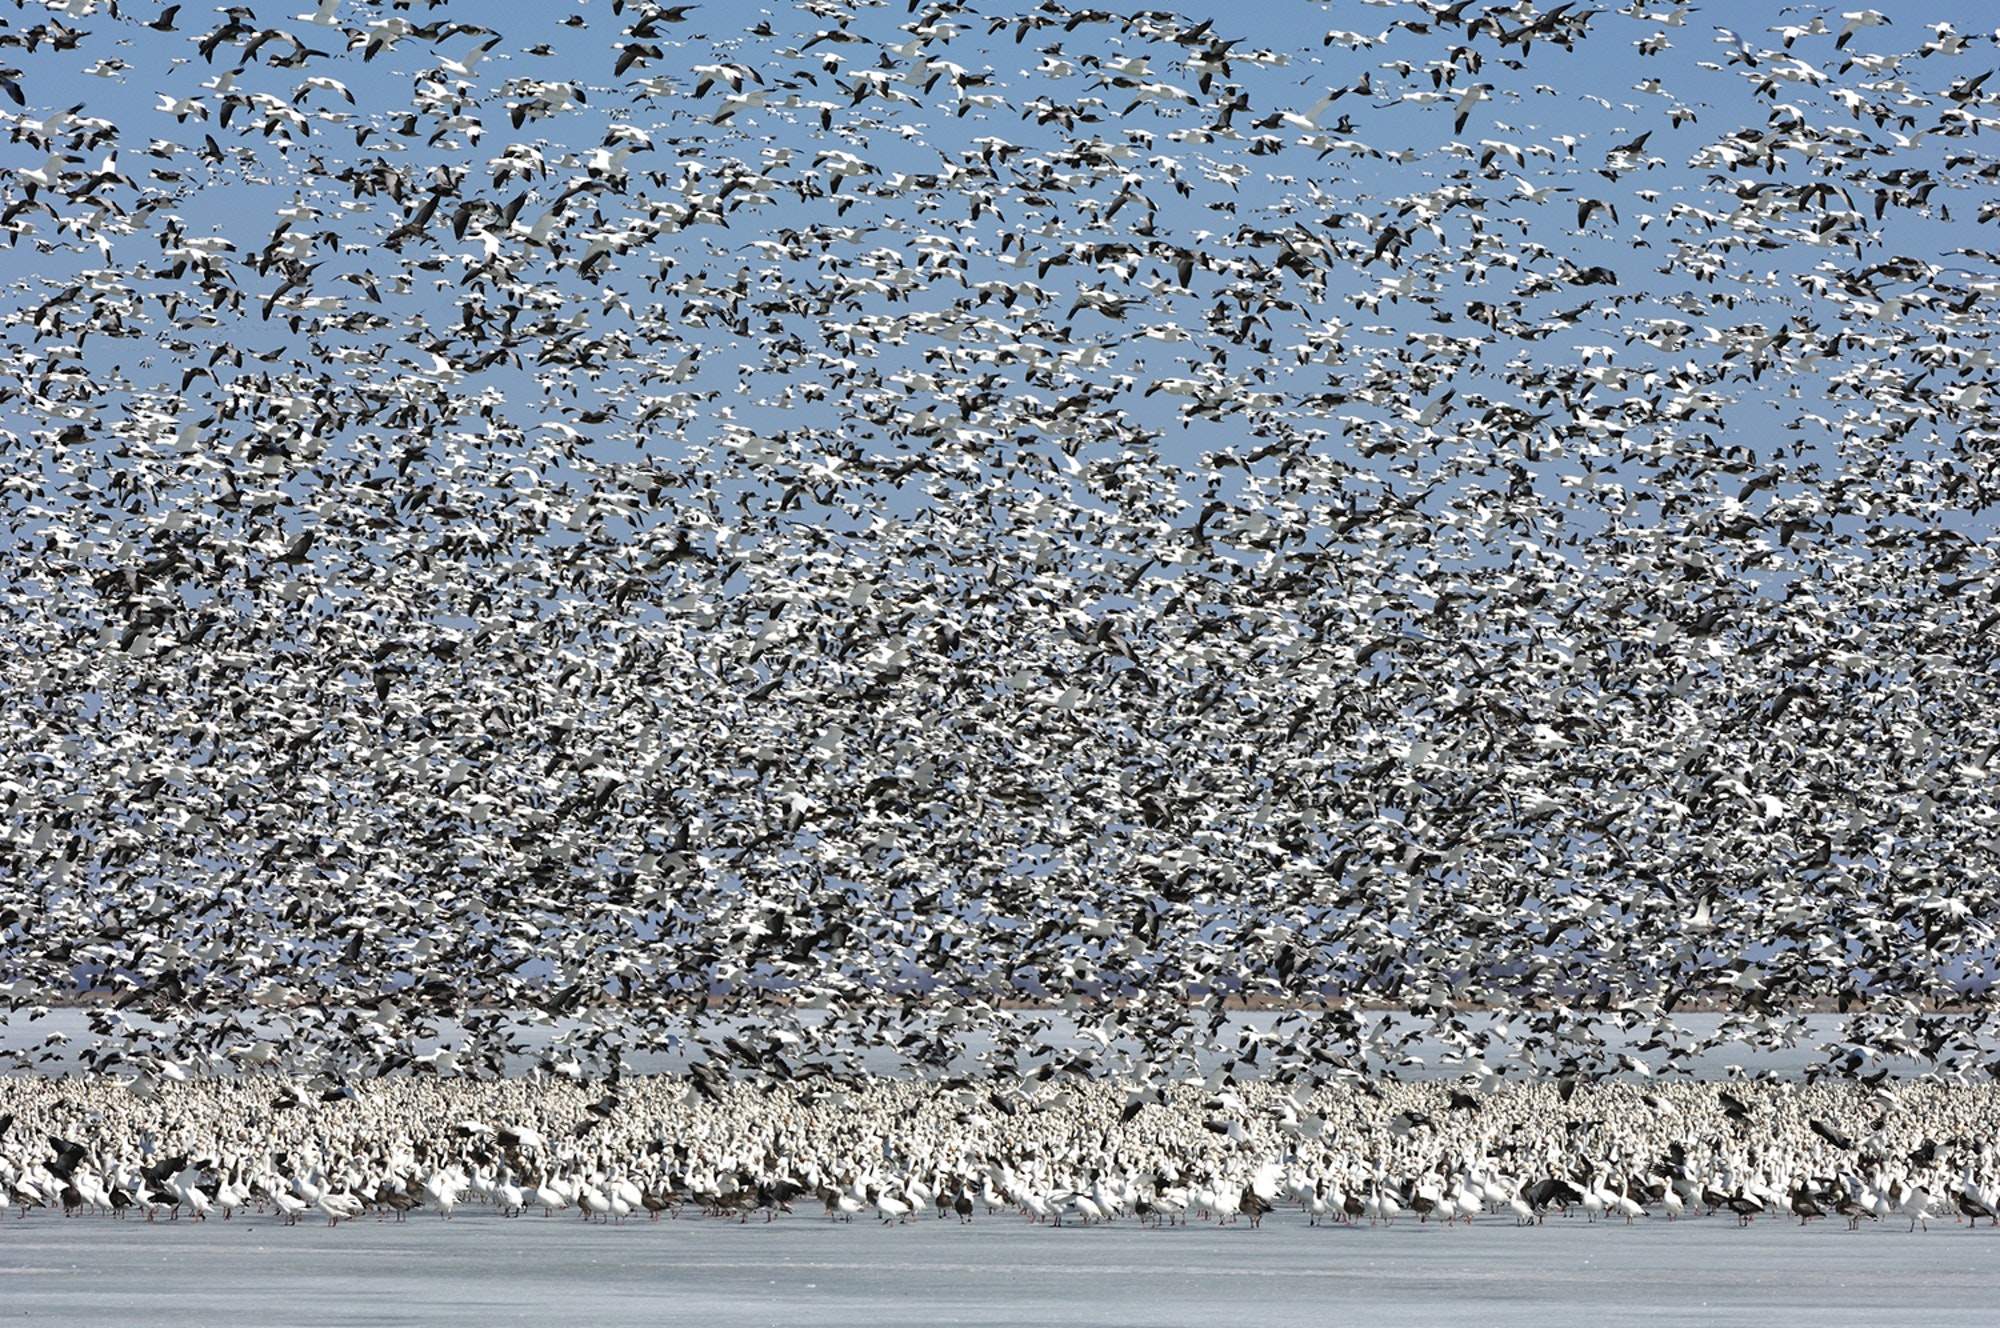 A giant flock of lesser snow geese departs from a frozen marsh during spring migration.